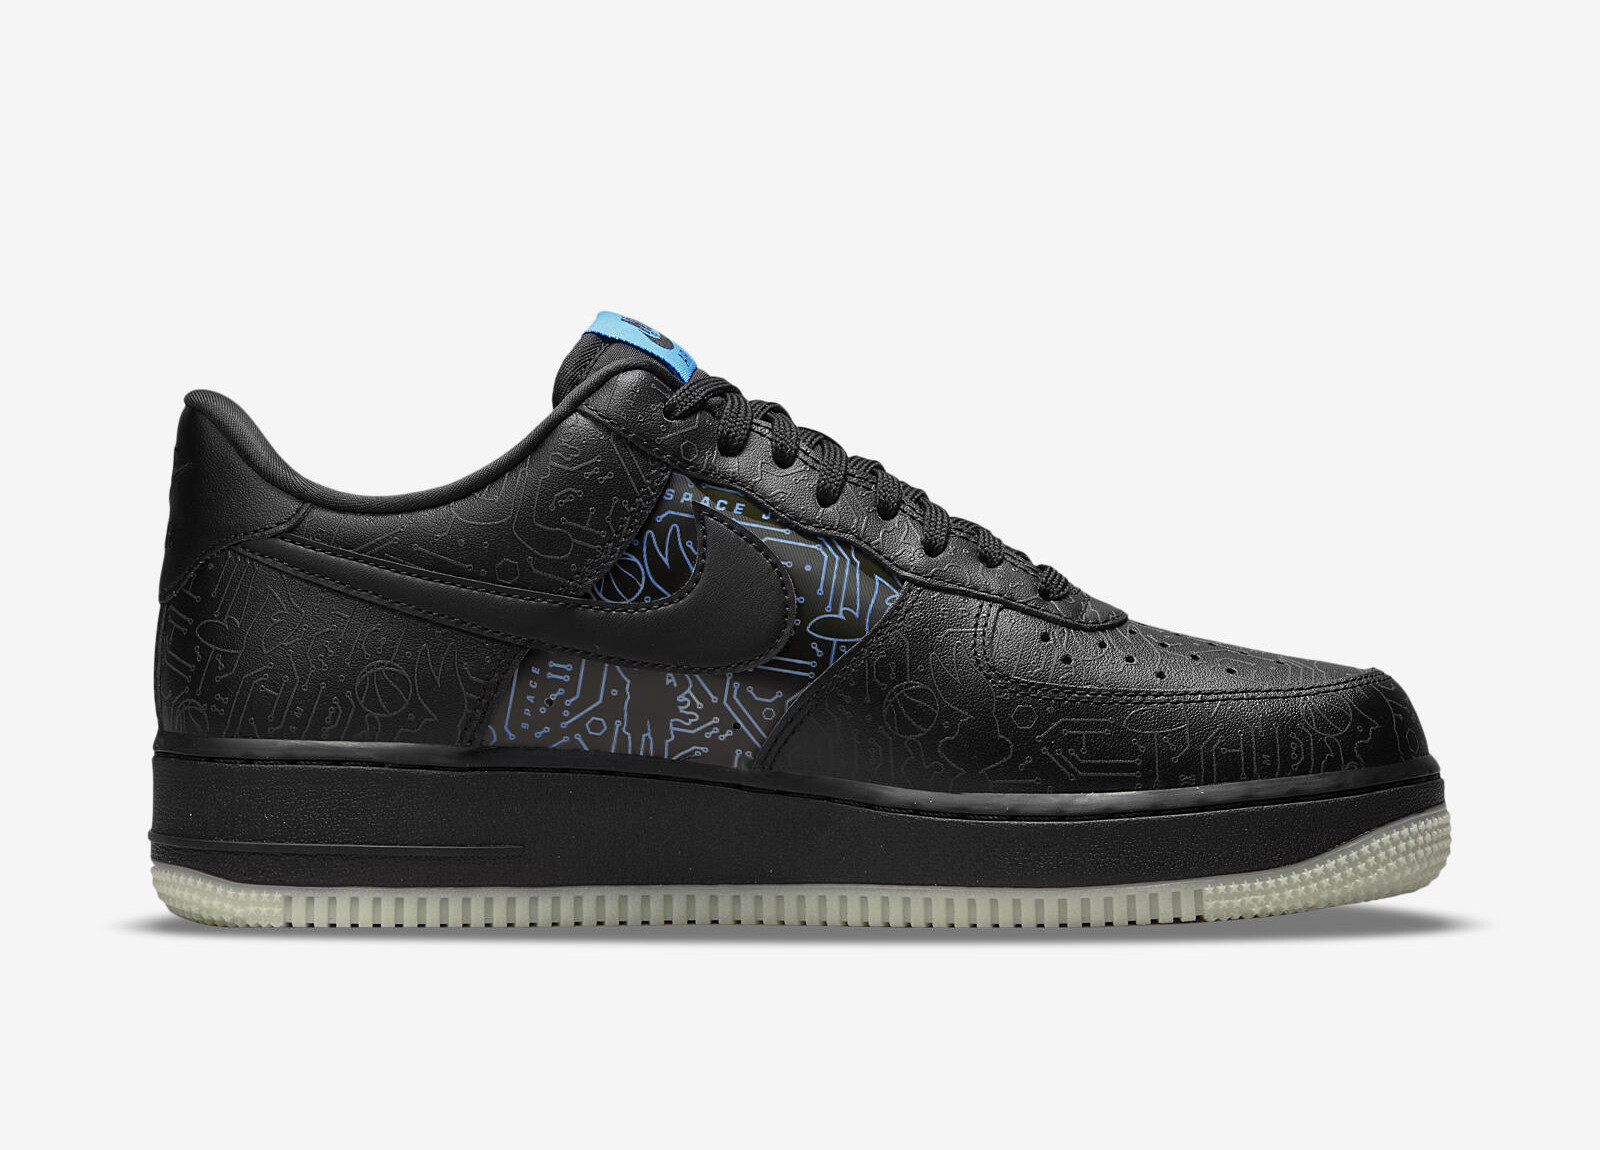 Space Jam x Nike
Air Force 1 07
« Computer Chip »